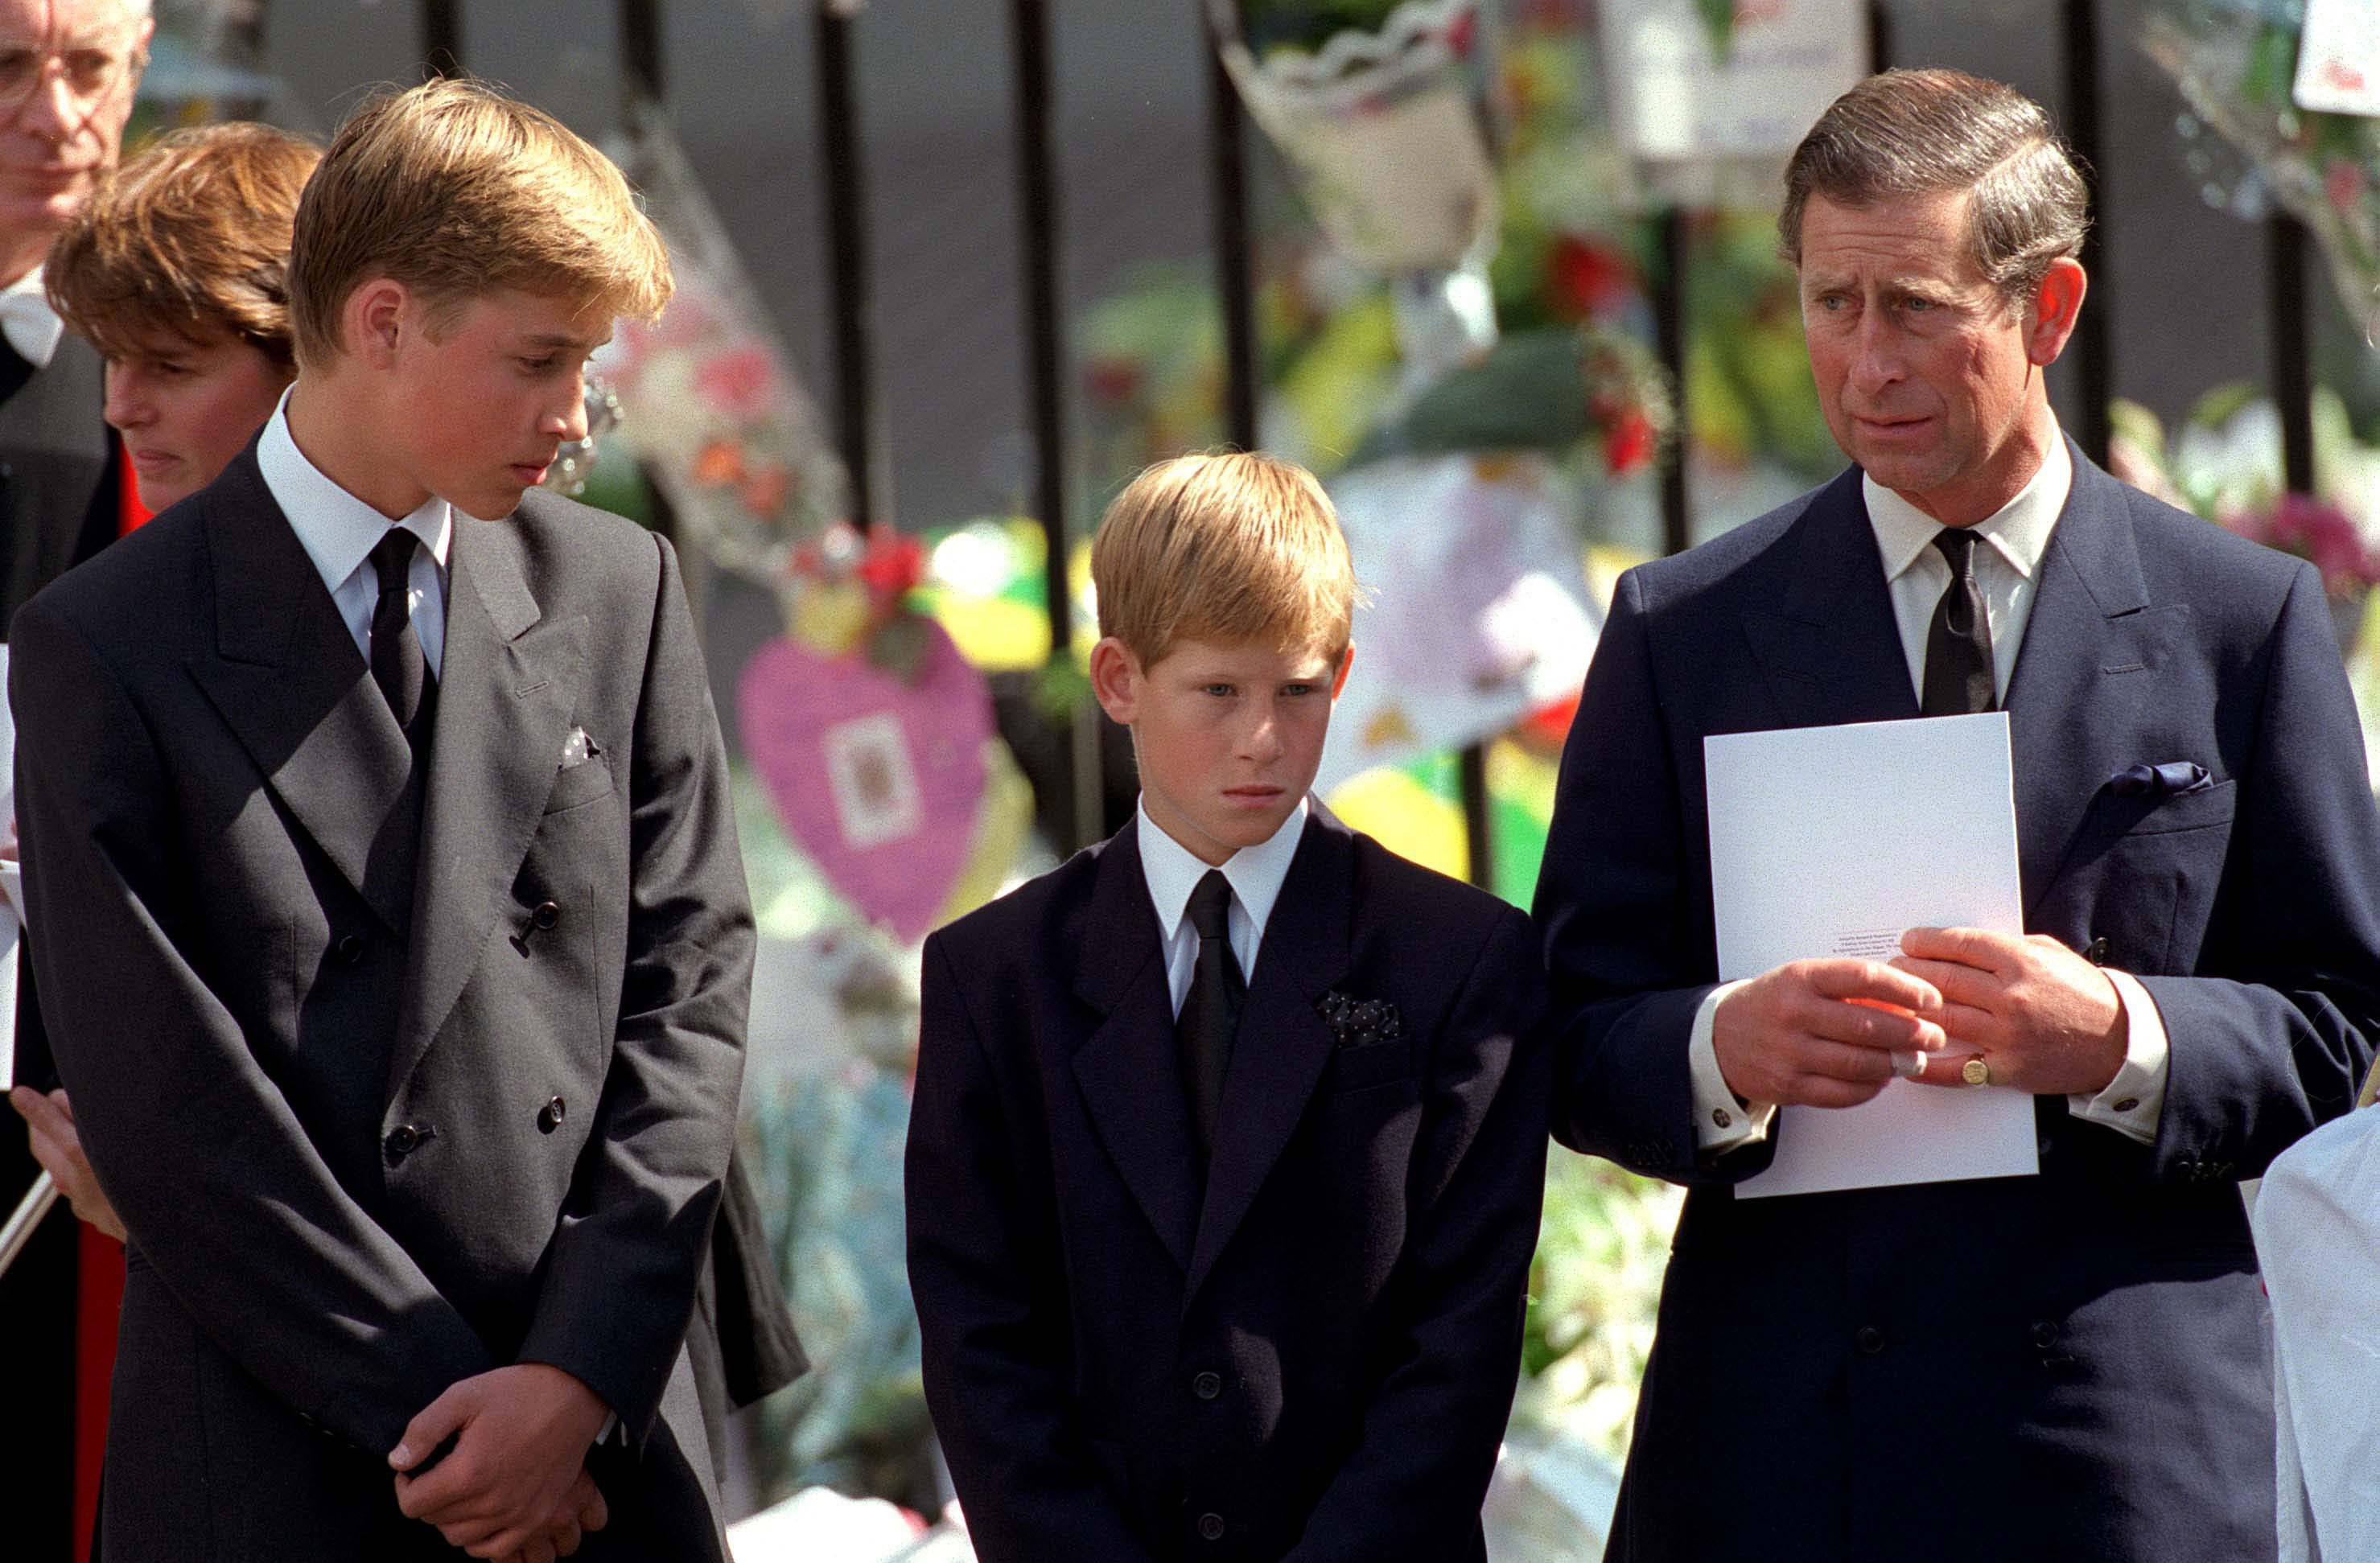 Prince William, Harry and Prince Charles in London 1997 on their mother funeral. | Source: Getty Images 